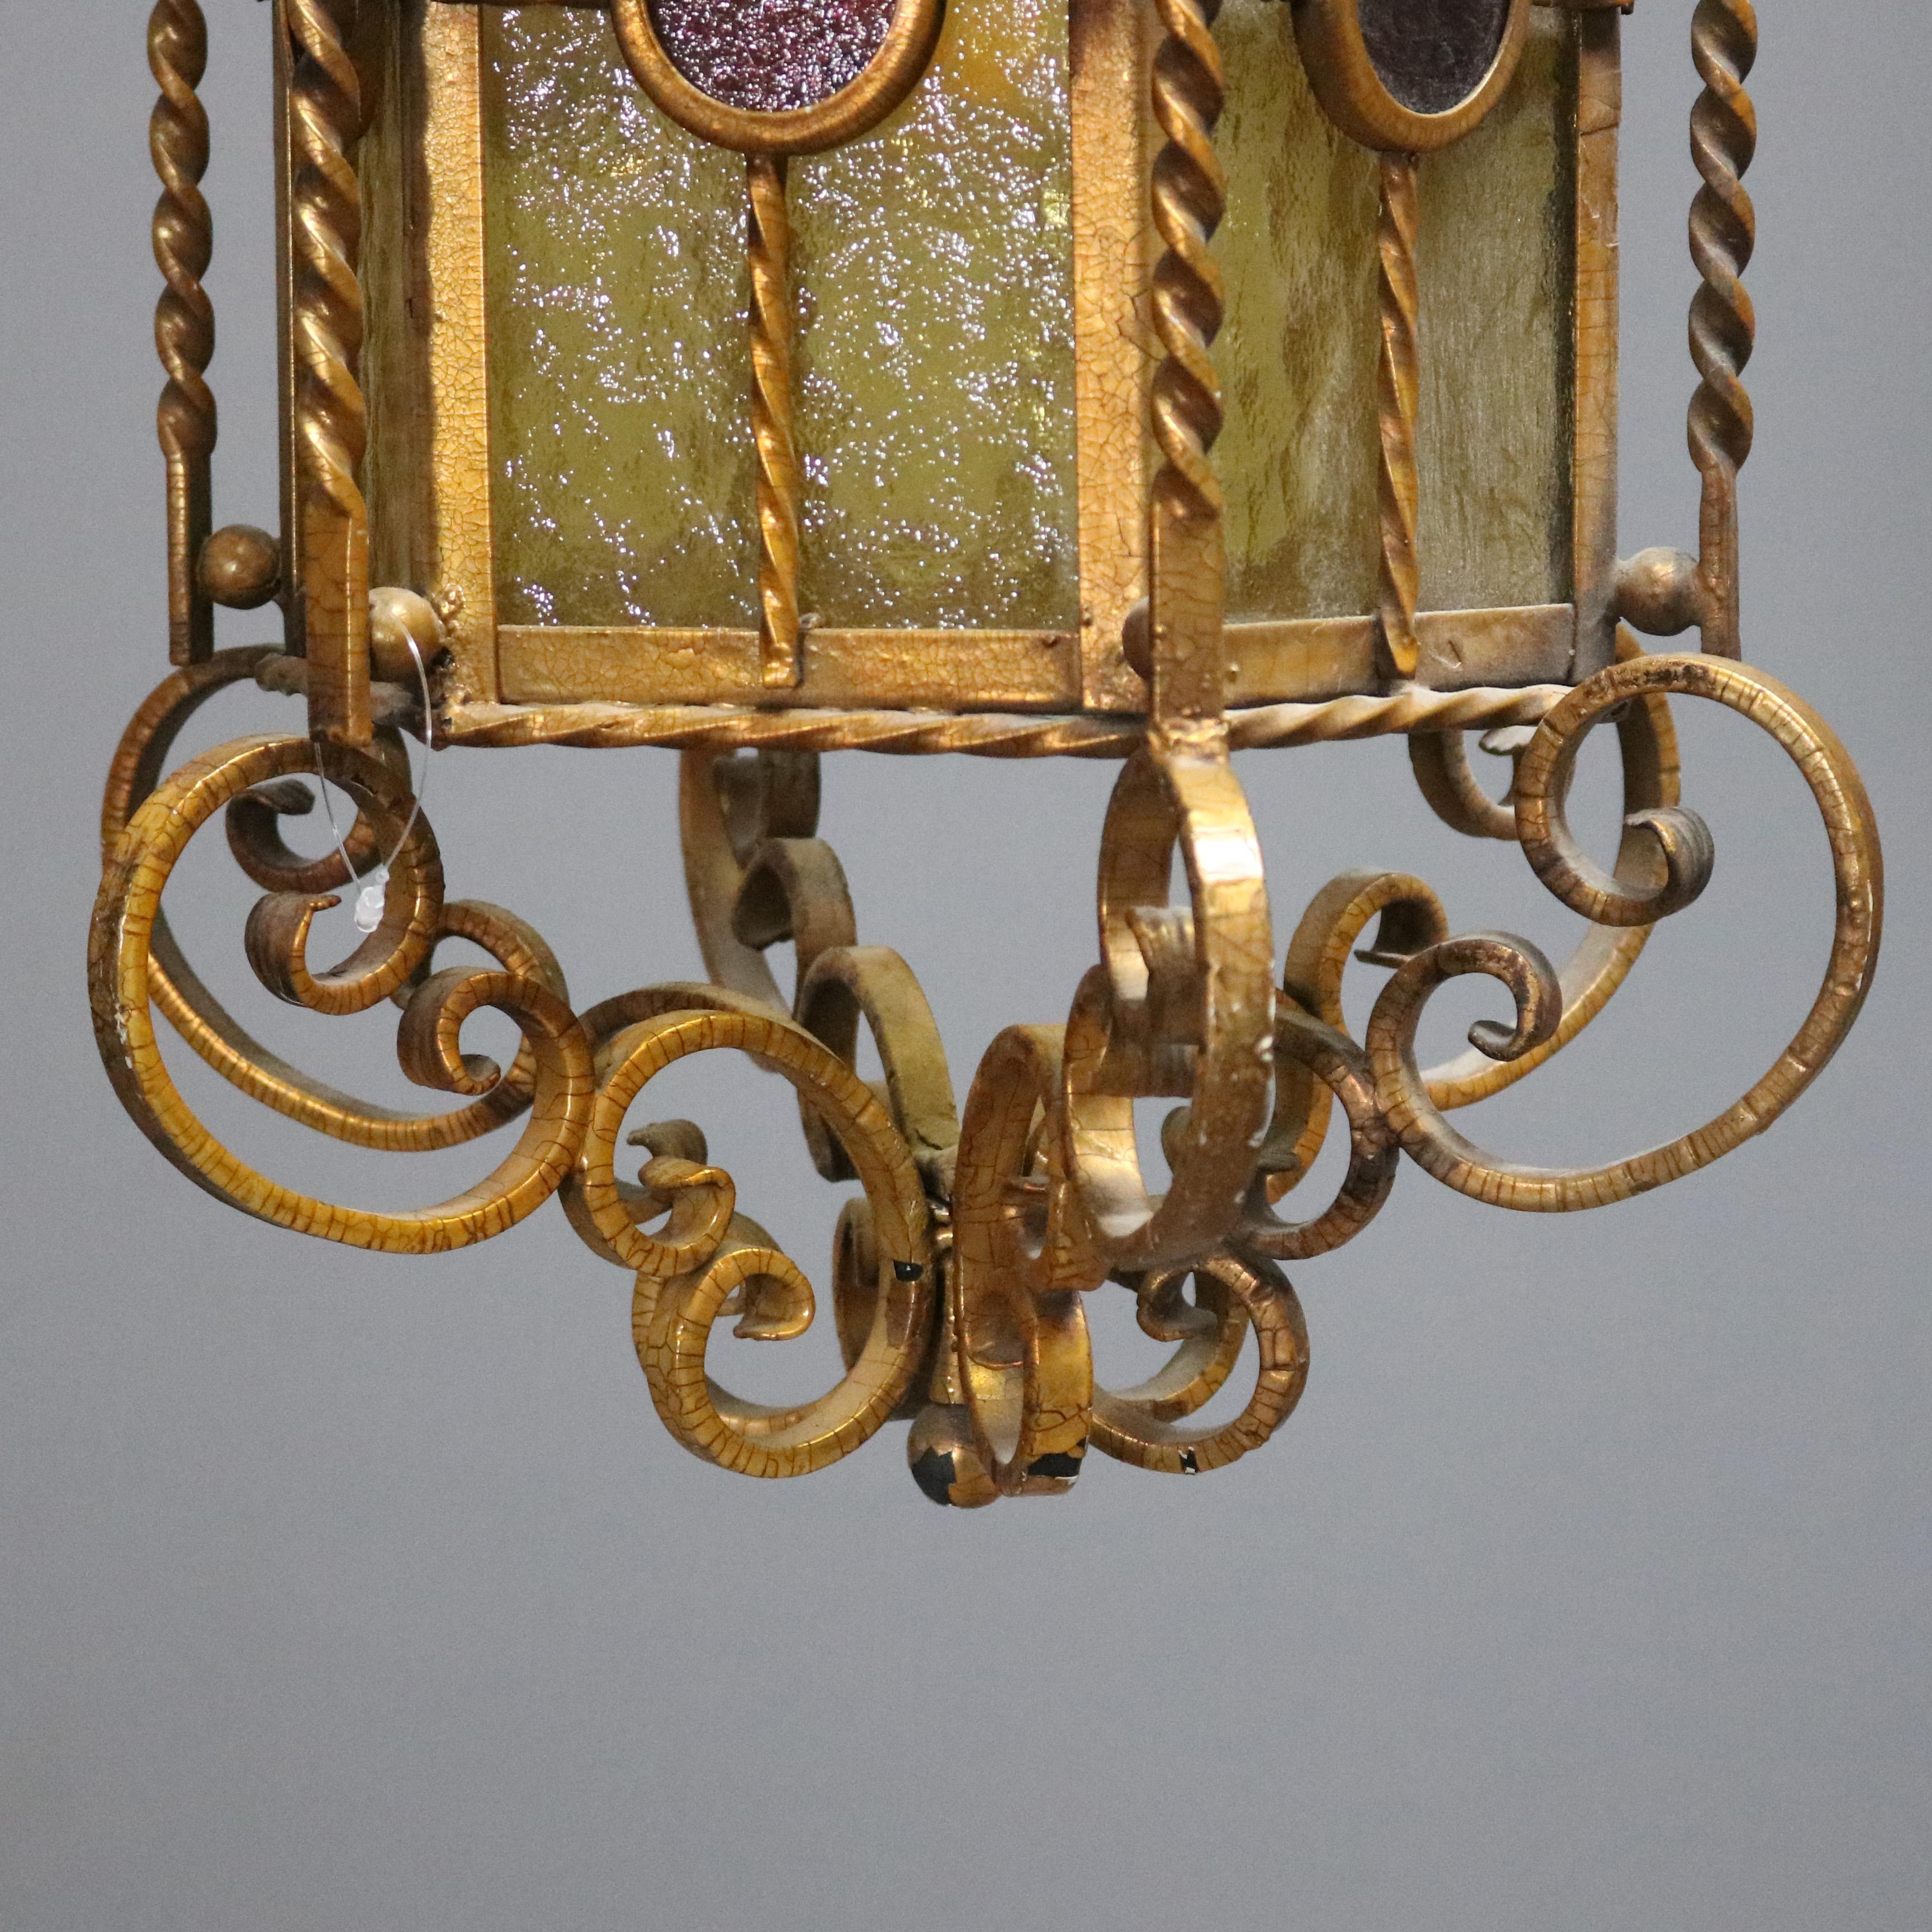 Gothic Antique Continental Wrought Iron and Art Glass Hanging Pendant Light, circa 1920